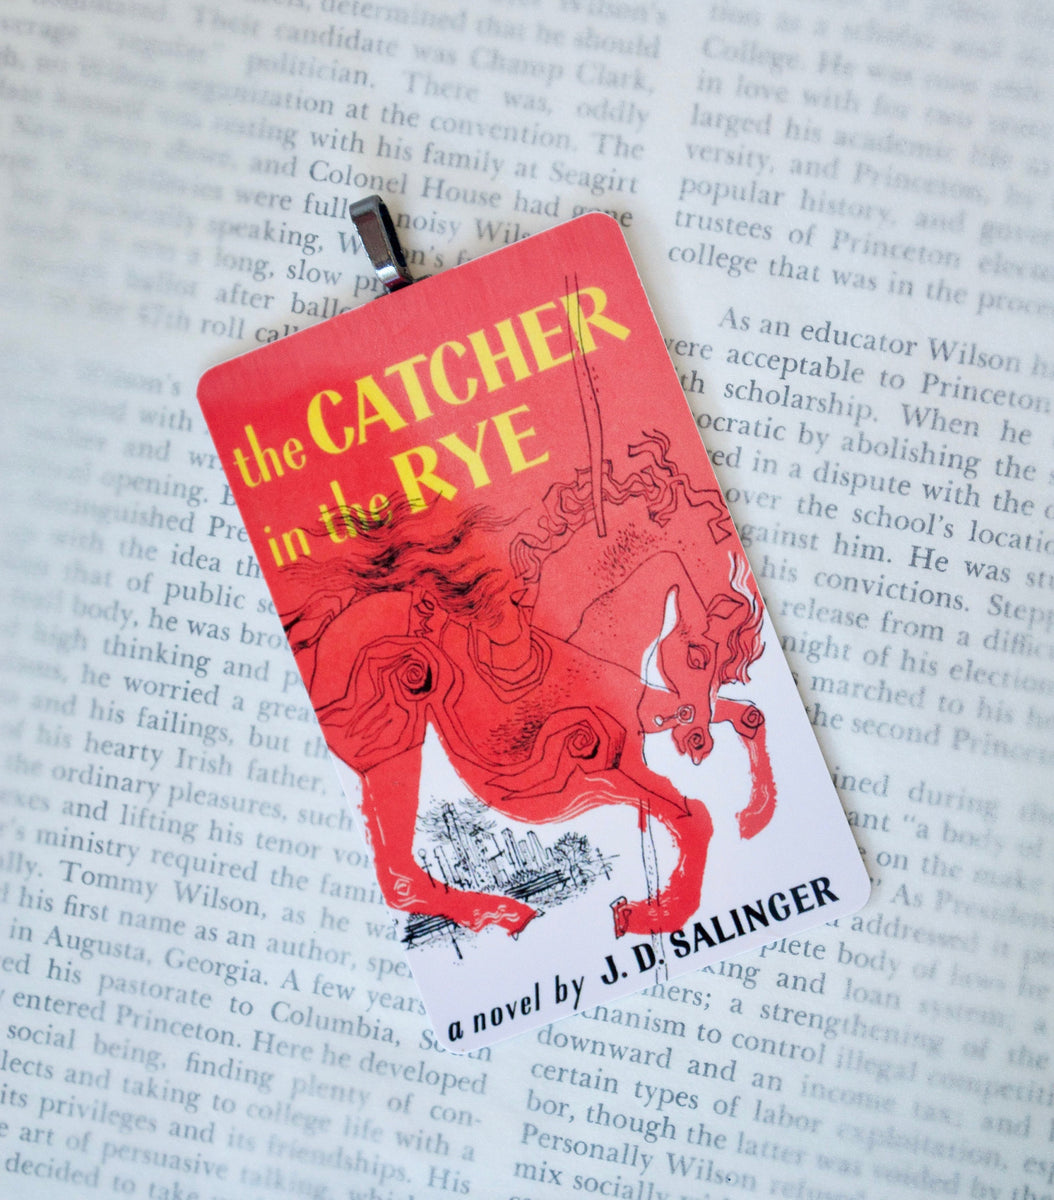 JD SALINGER writer doll, author The catcher in the rye - Reader gifts  Bookworm - book shelf decoration 